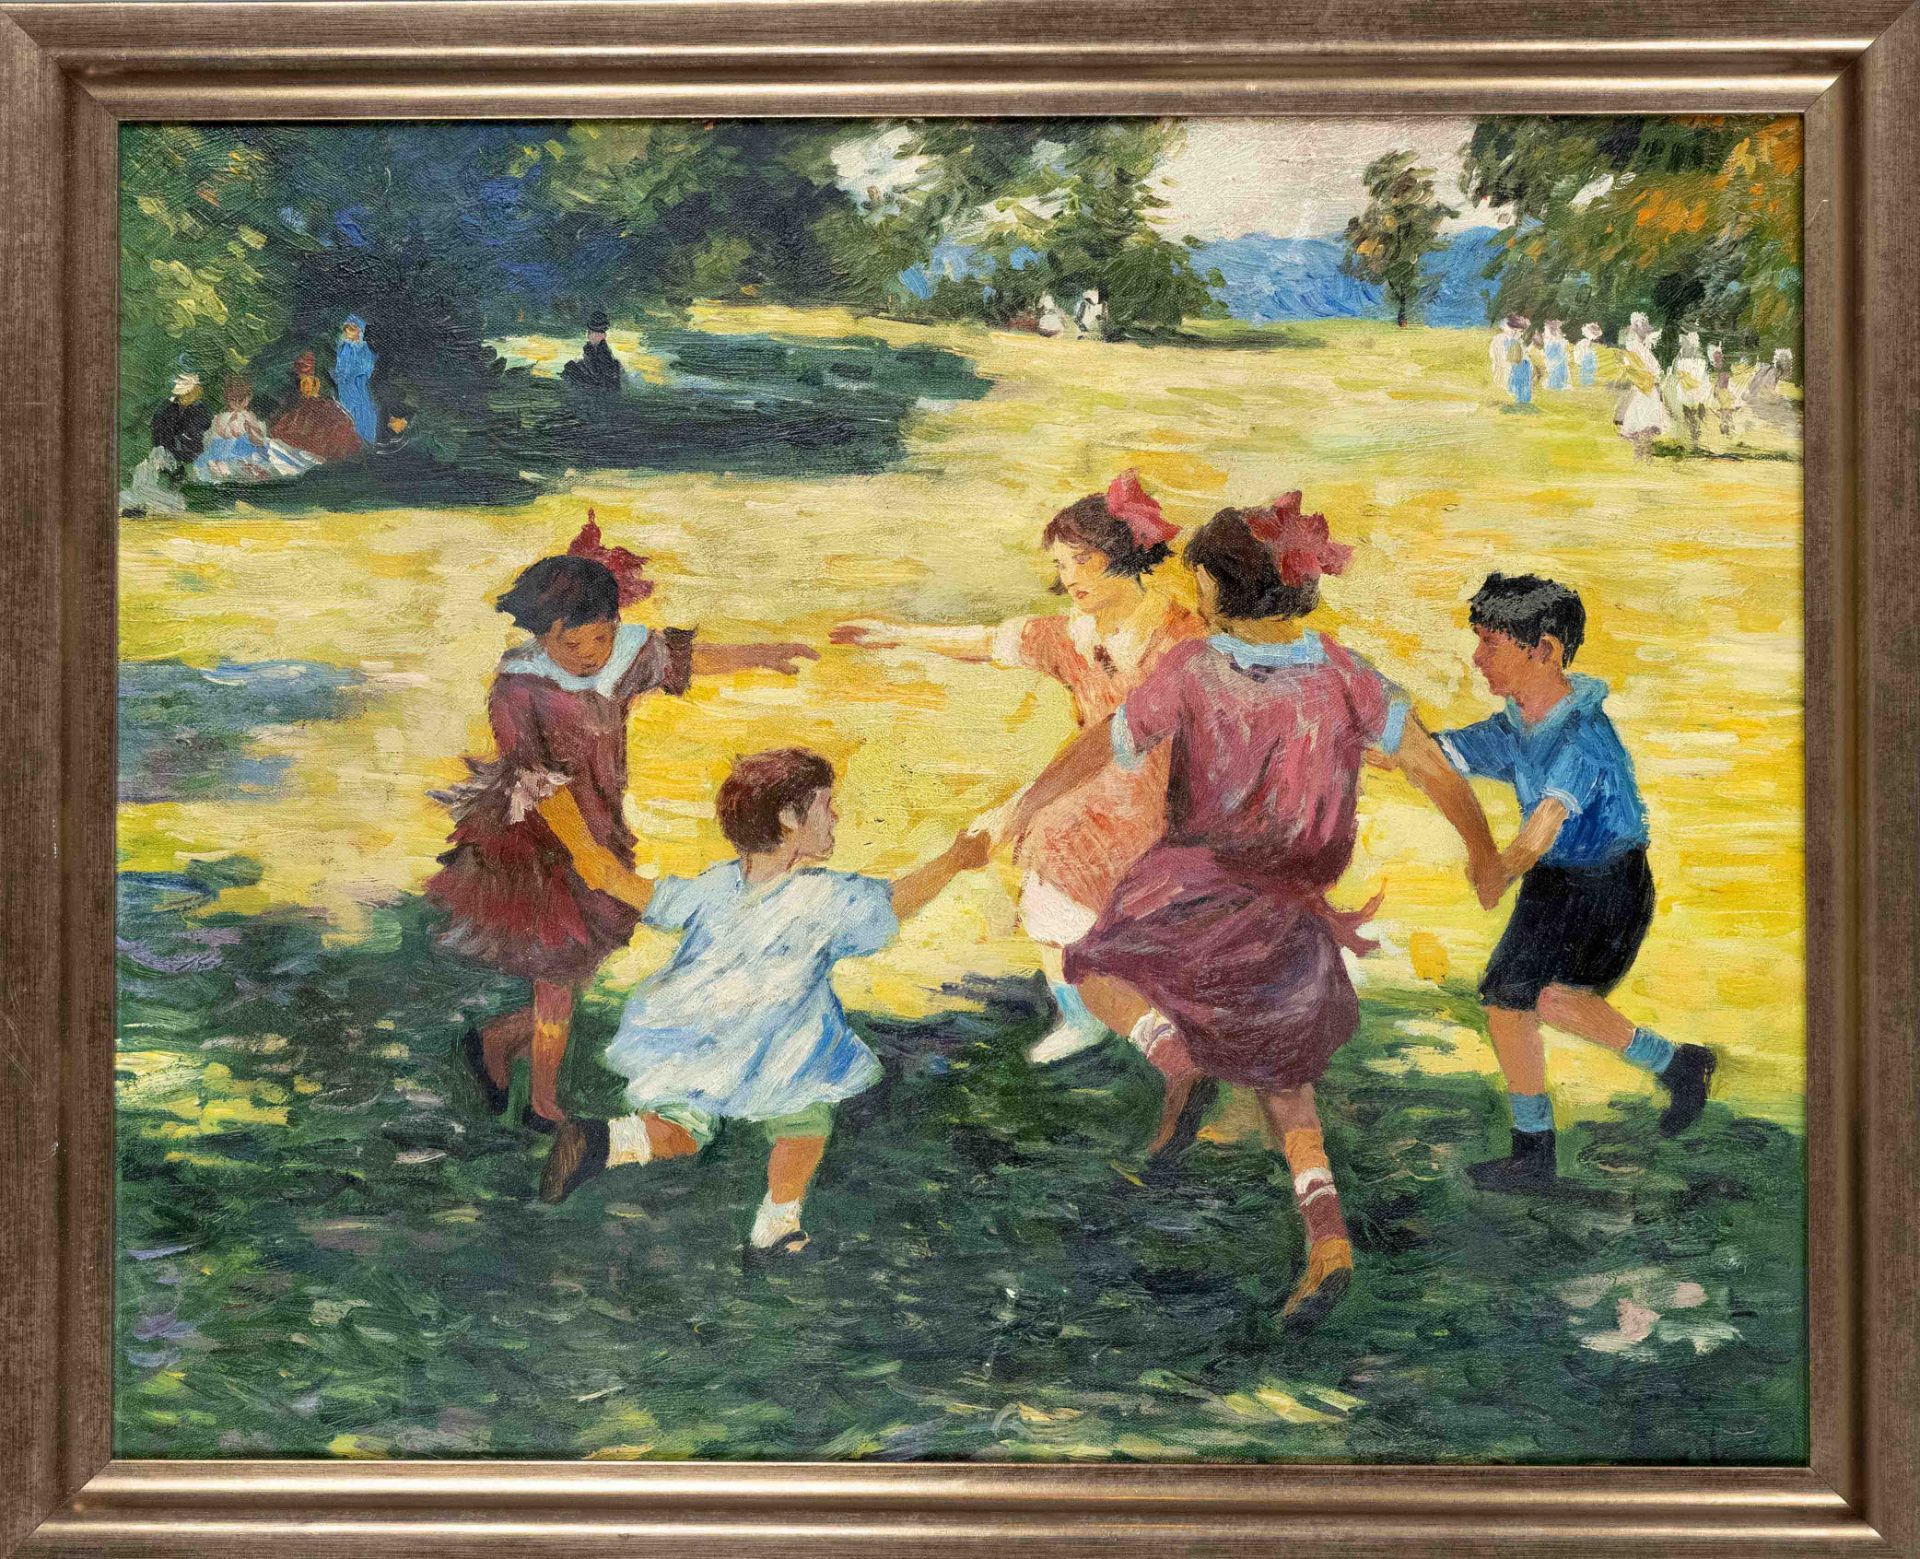 Unidentified painter 1st half 20th century, Park Landscape with Dancing Children, oil on canvas over